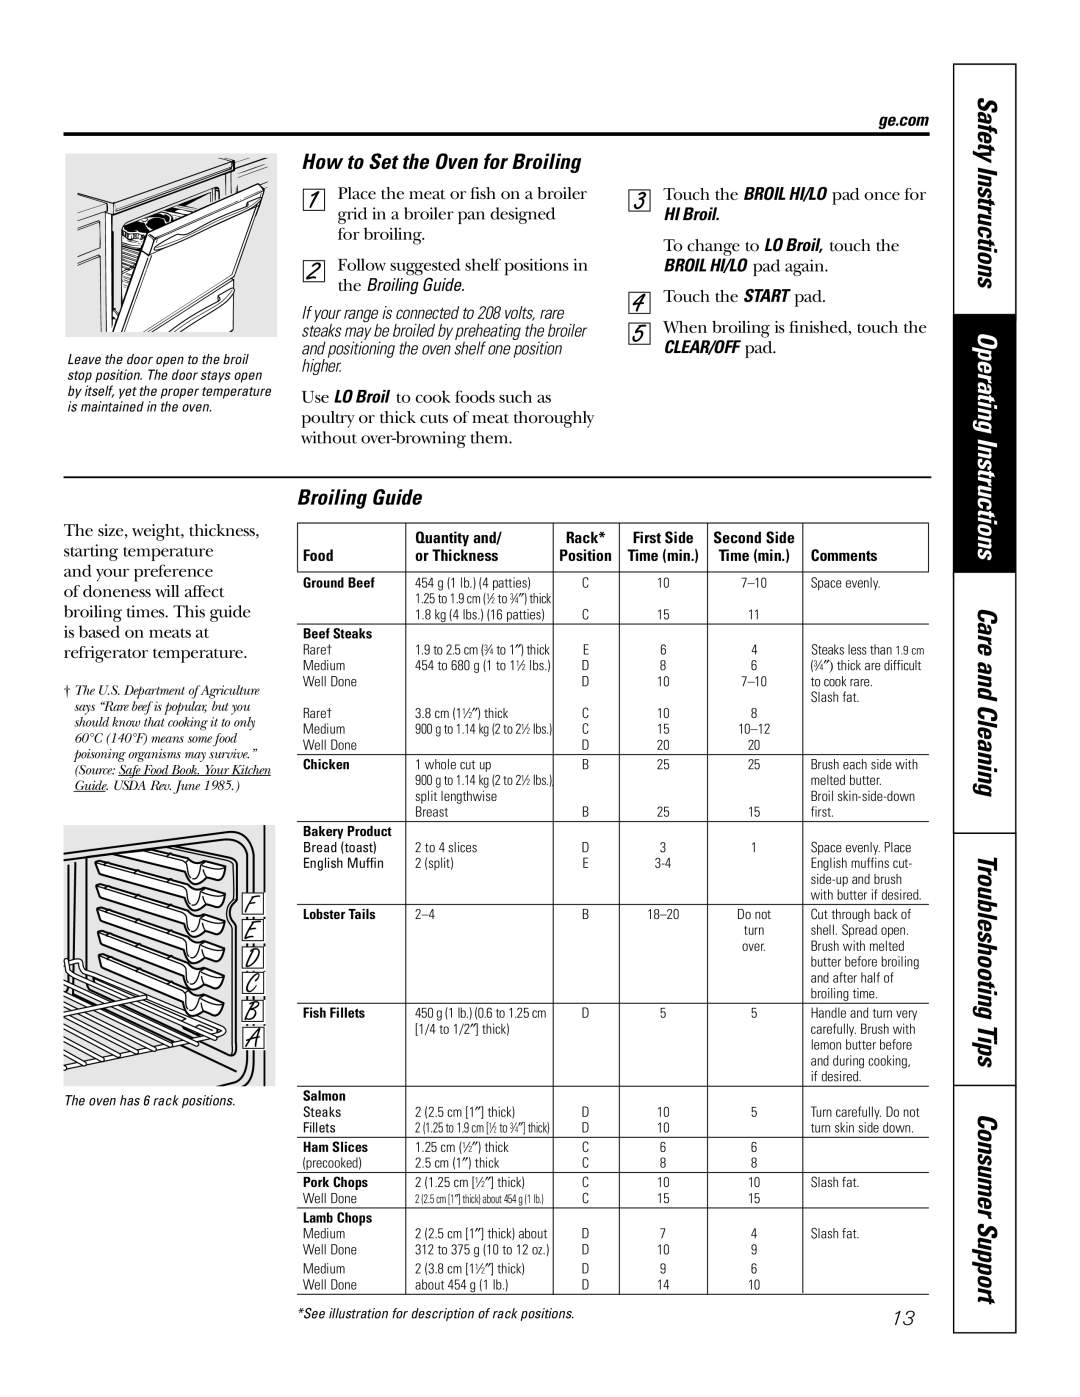 GE JBP74 owner manual Instructions Operating, How to Set the Oven for Broiling, Safety, the Broiling Guide 